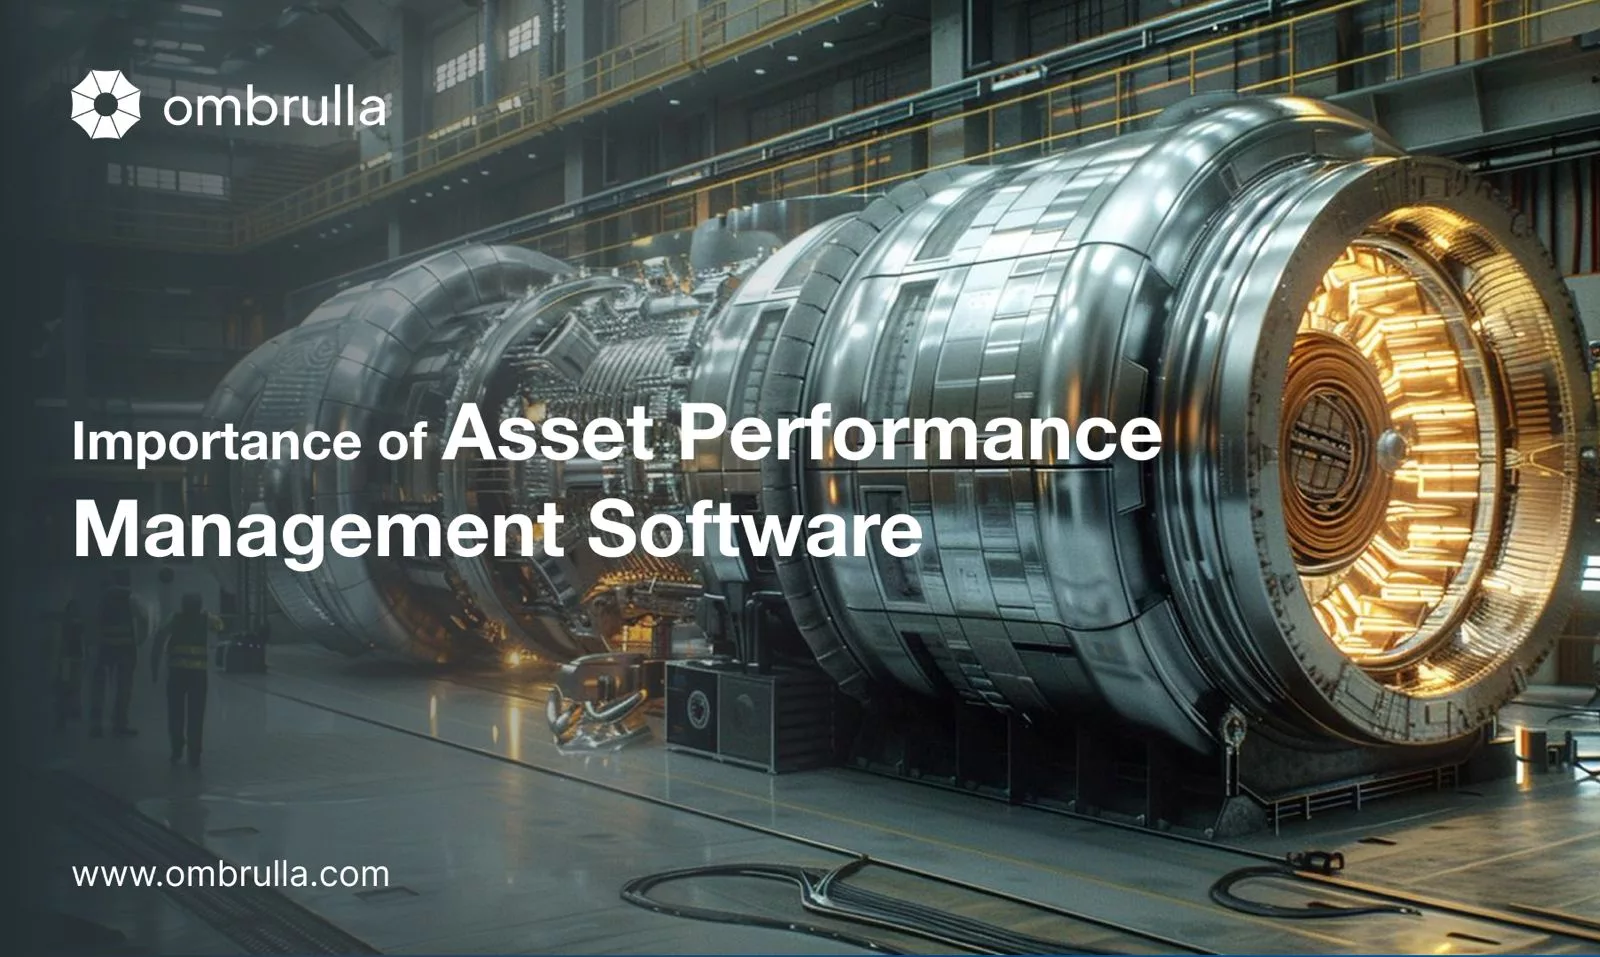 Why Asset Performance Management Software is Important?